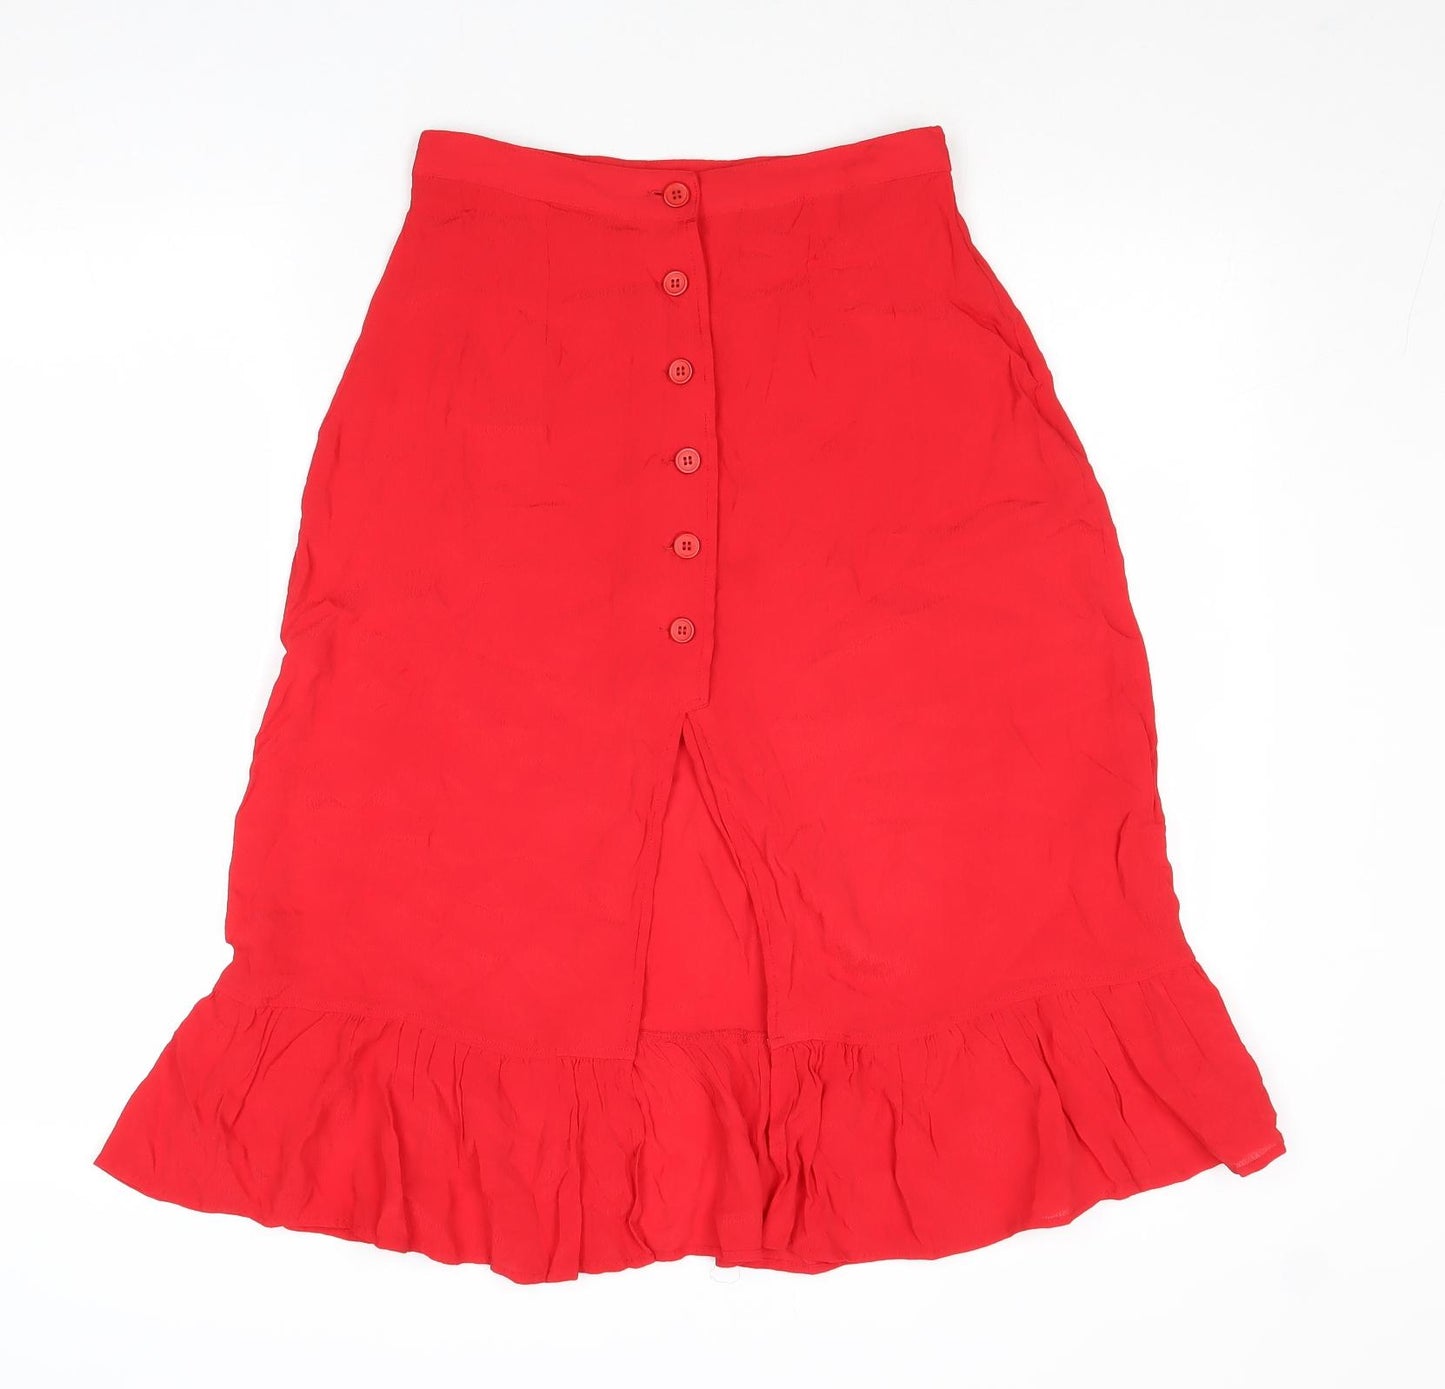 ASOS Womens Red Viscose Swing Skirt Size 8 Button